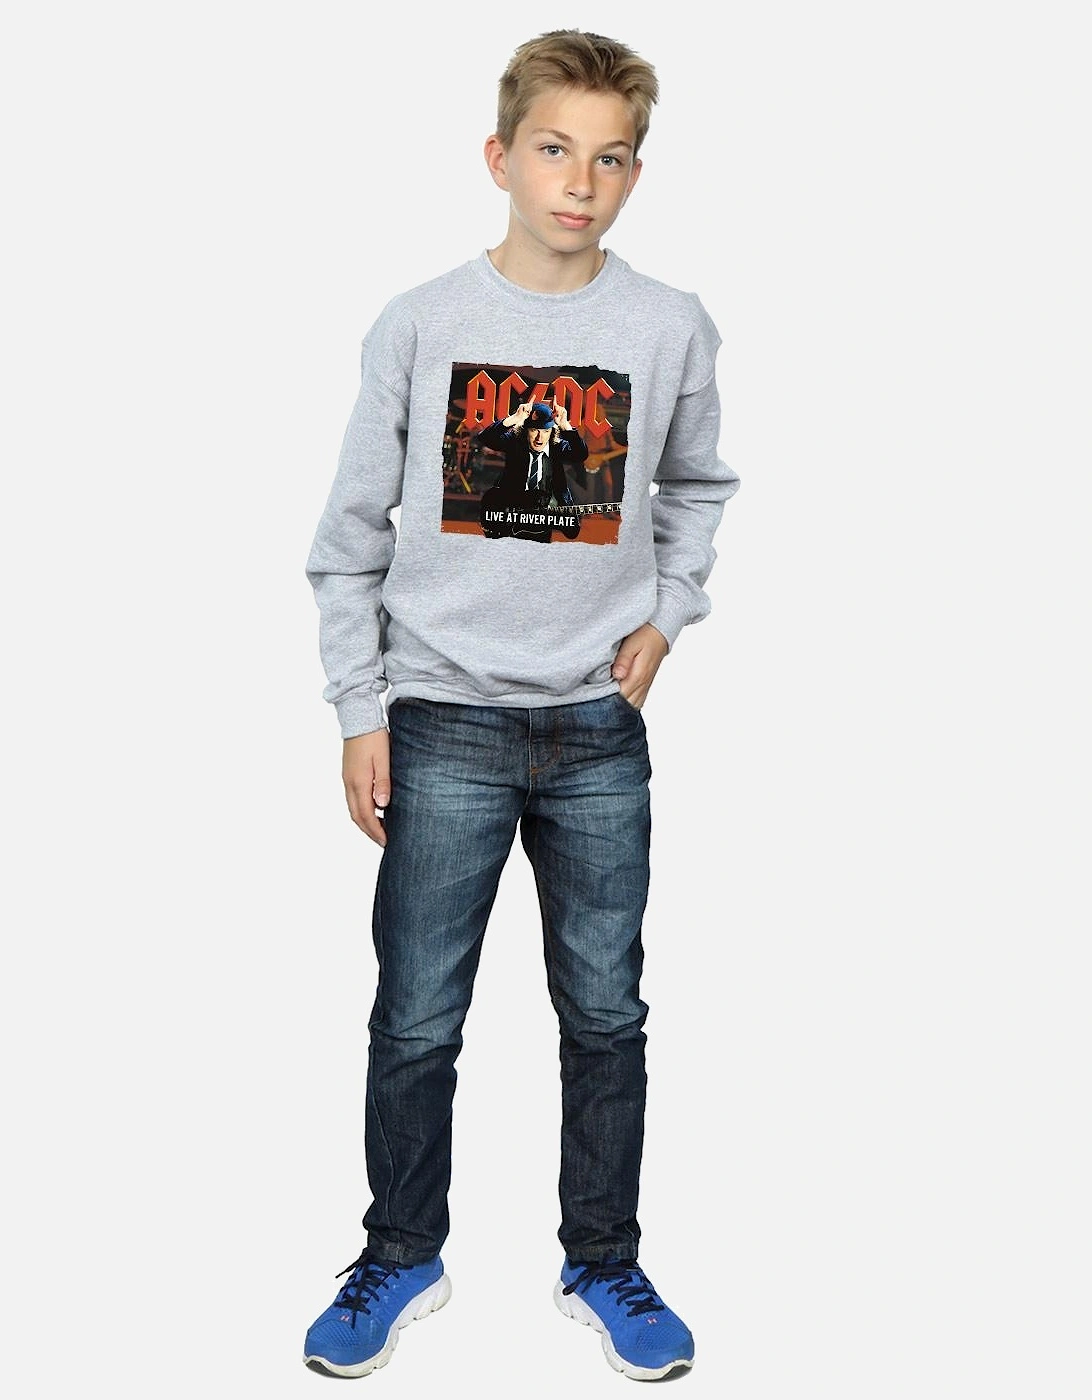 Boys Live At River Plate Columbia Records Sweatshirt